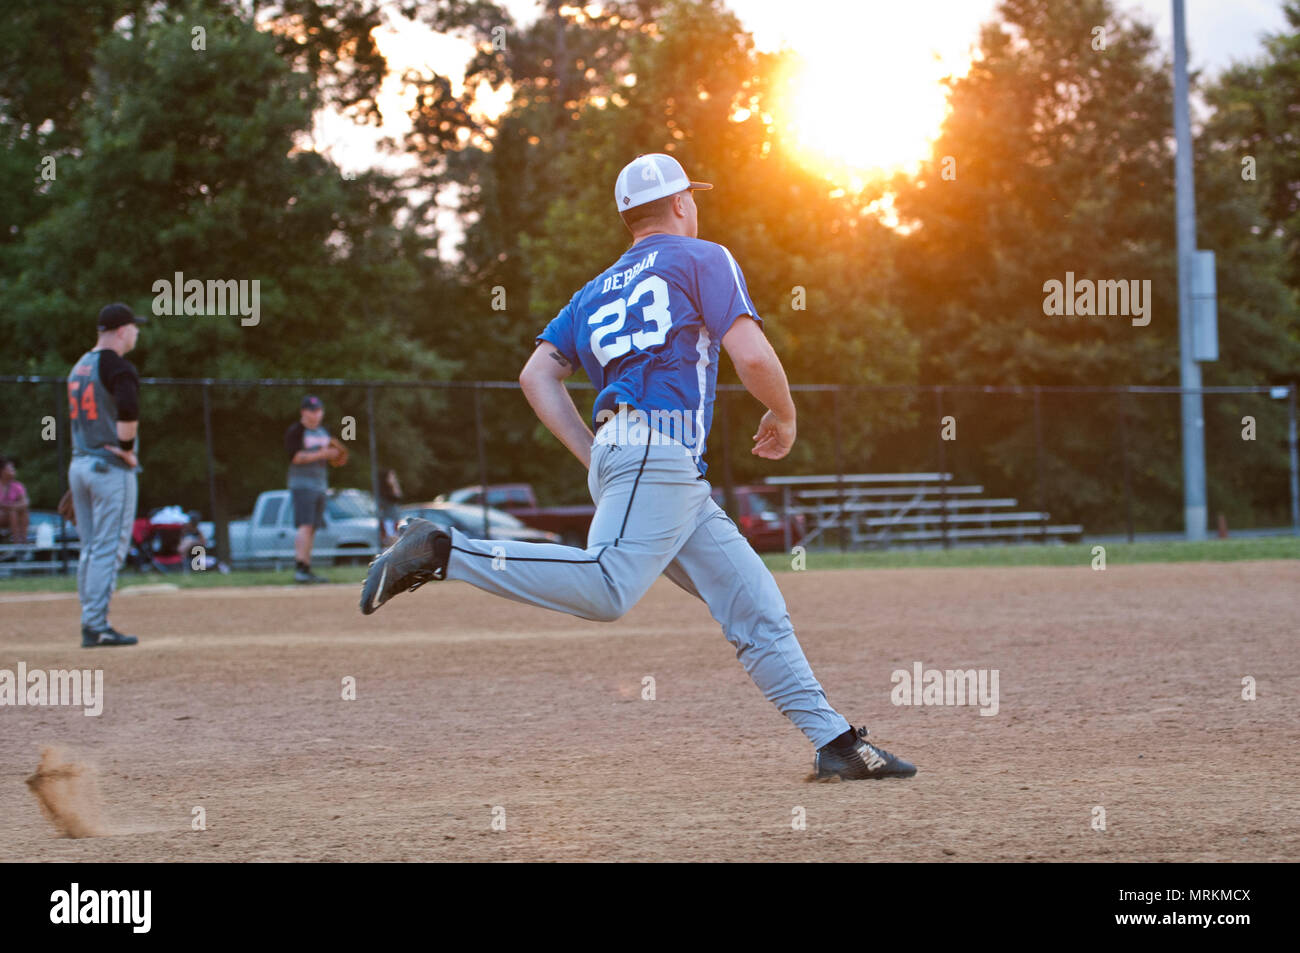 22nd Intelligence Squadron infielder rounds the bases during an Intramural Softball game against the 94th Intelligence Squadron, June 21, 2017 at Fort George G. Meade. 22nd IS won by a score of 10-0. (U.S. Air Force photo/Tech. Sgt. Mark Thompson) Stock Photo